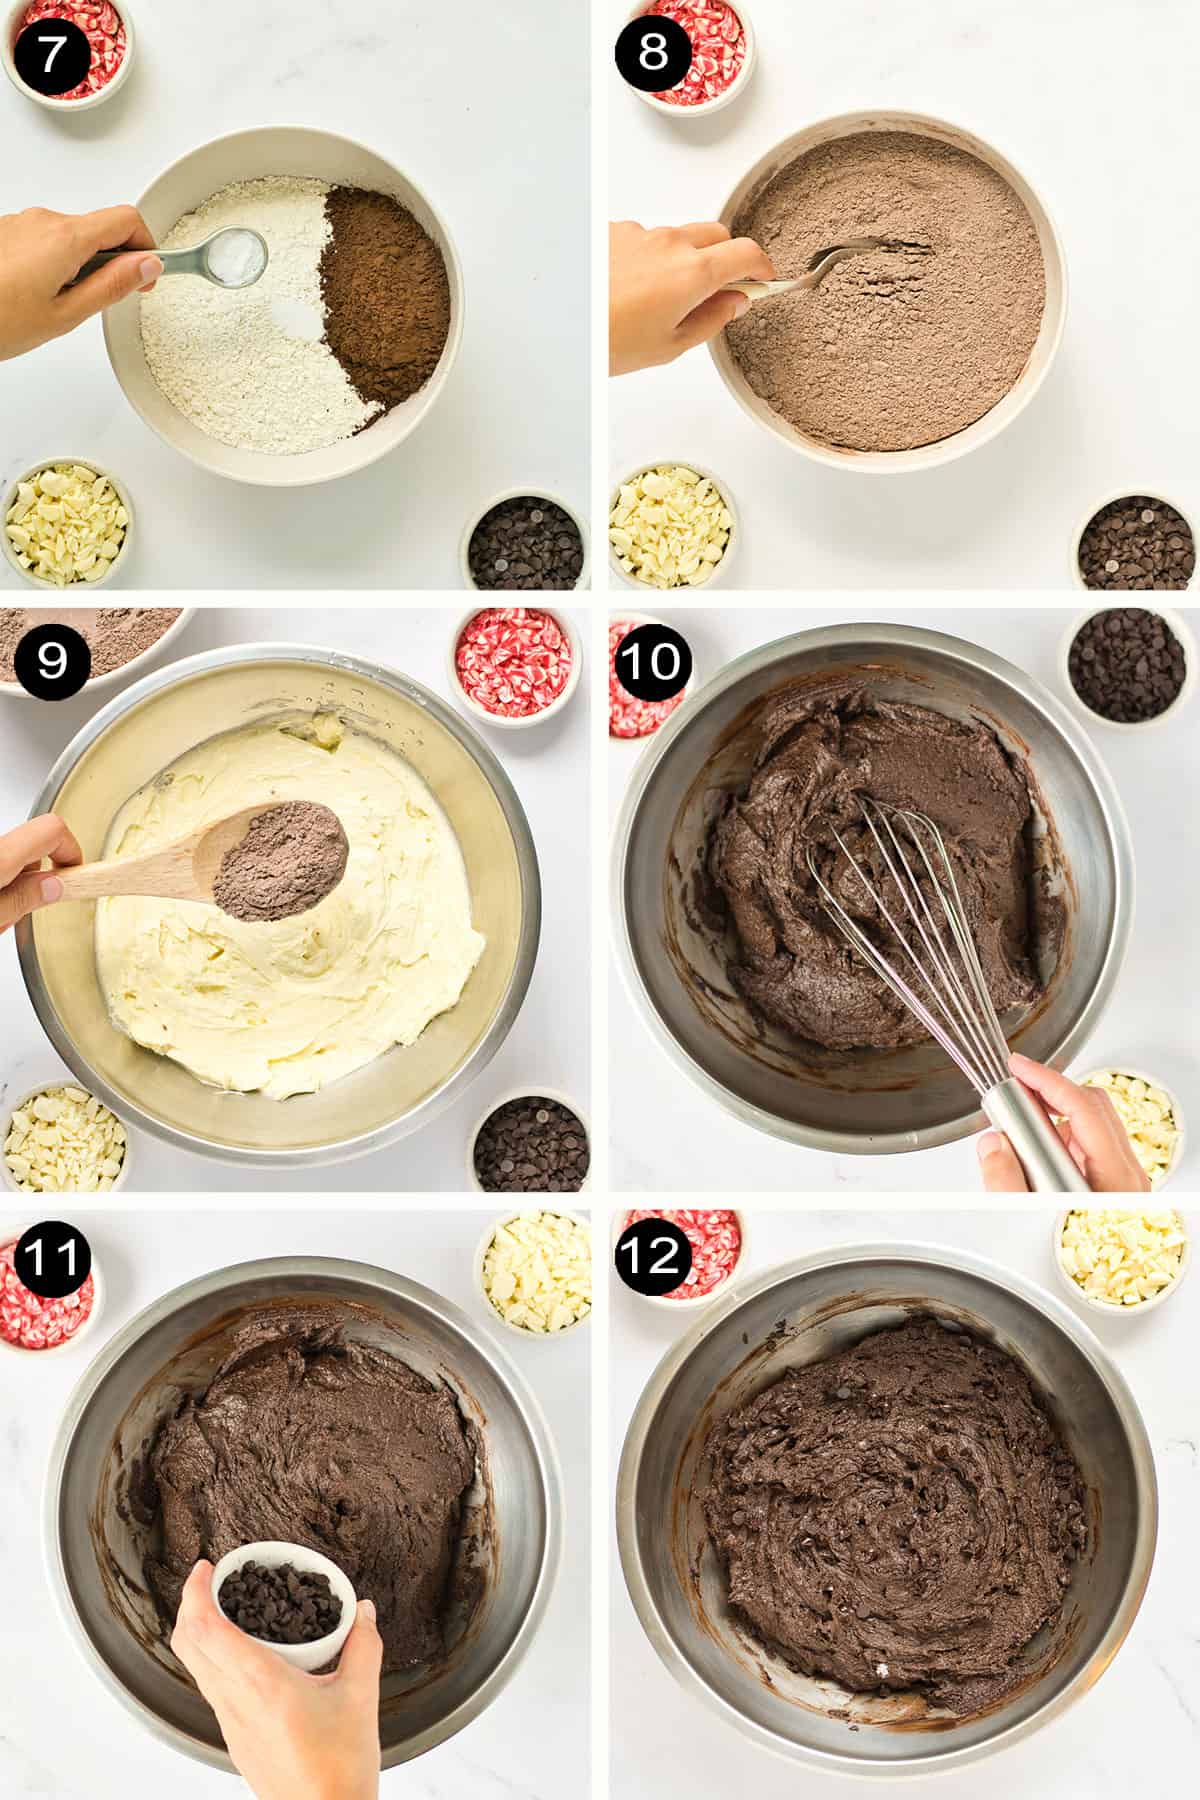 Steps 7-12 to make chocolate mint chip cookies.